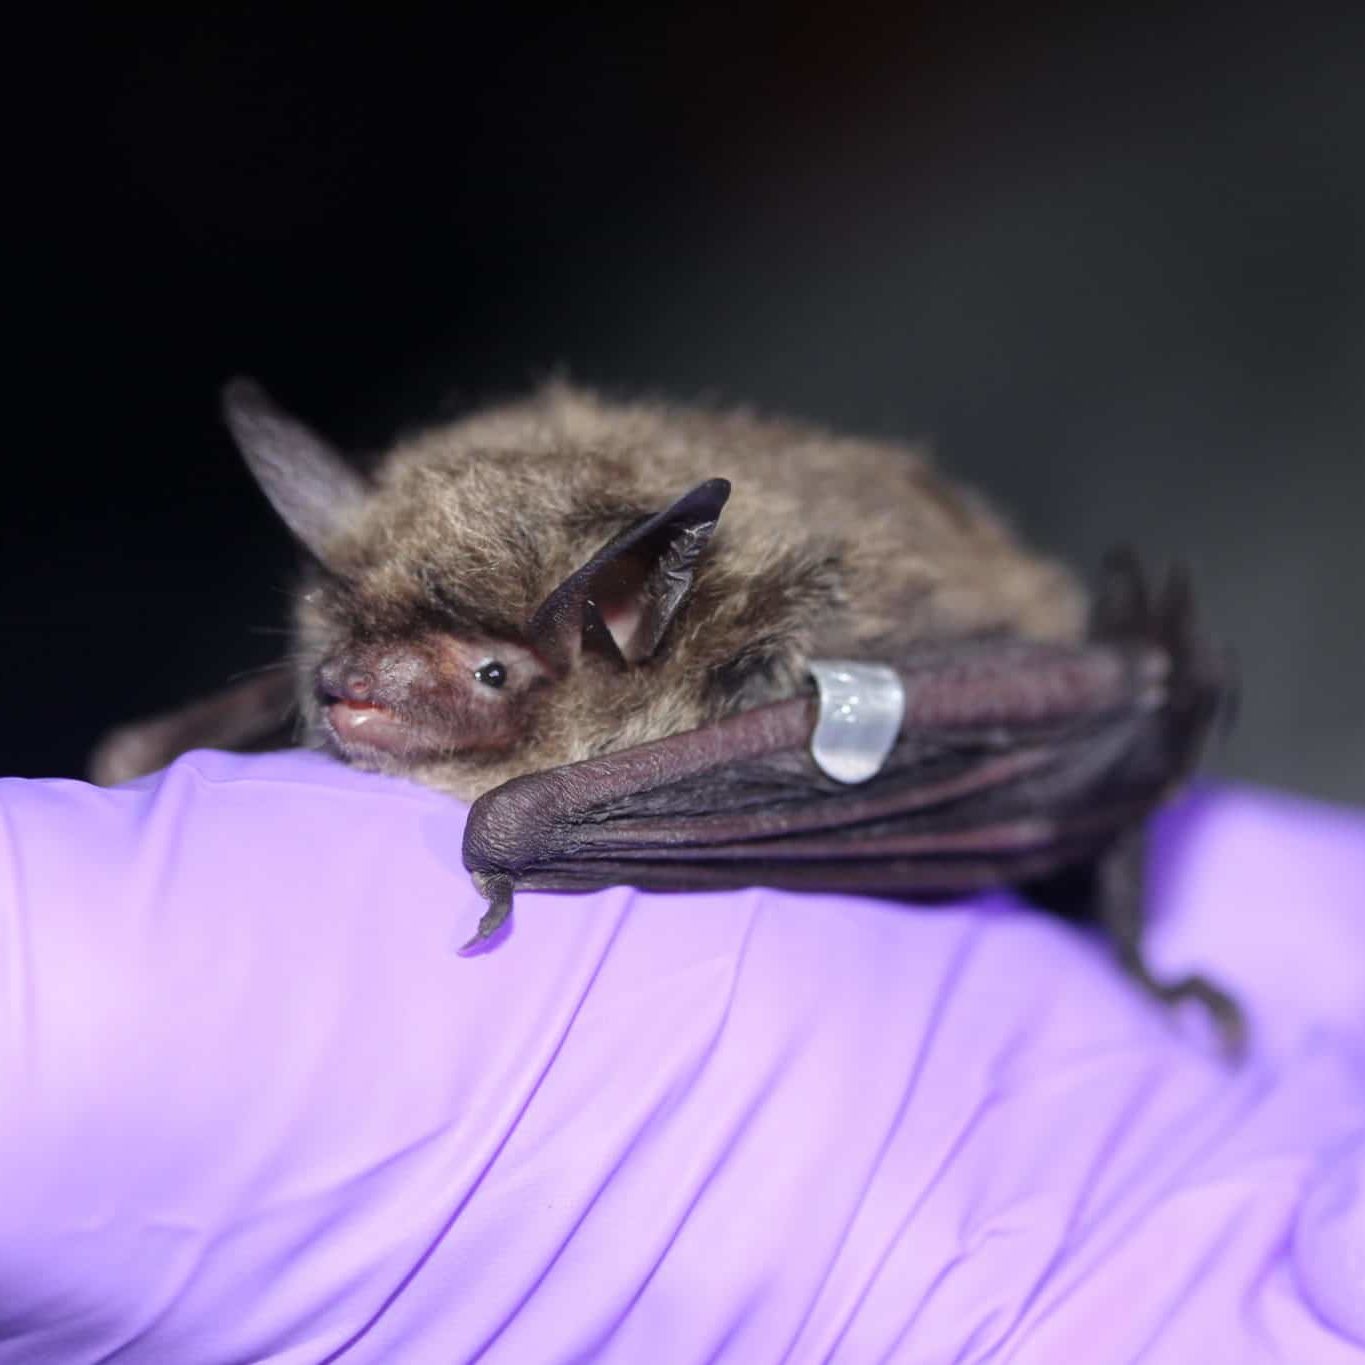 Northern long-eared bat with a wing band